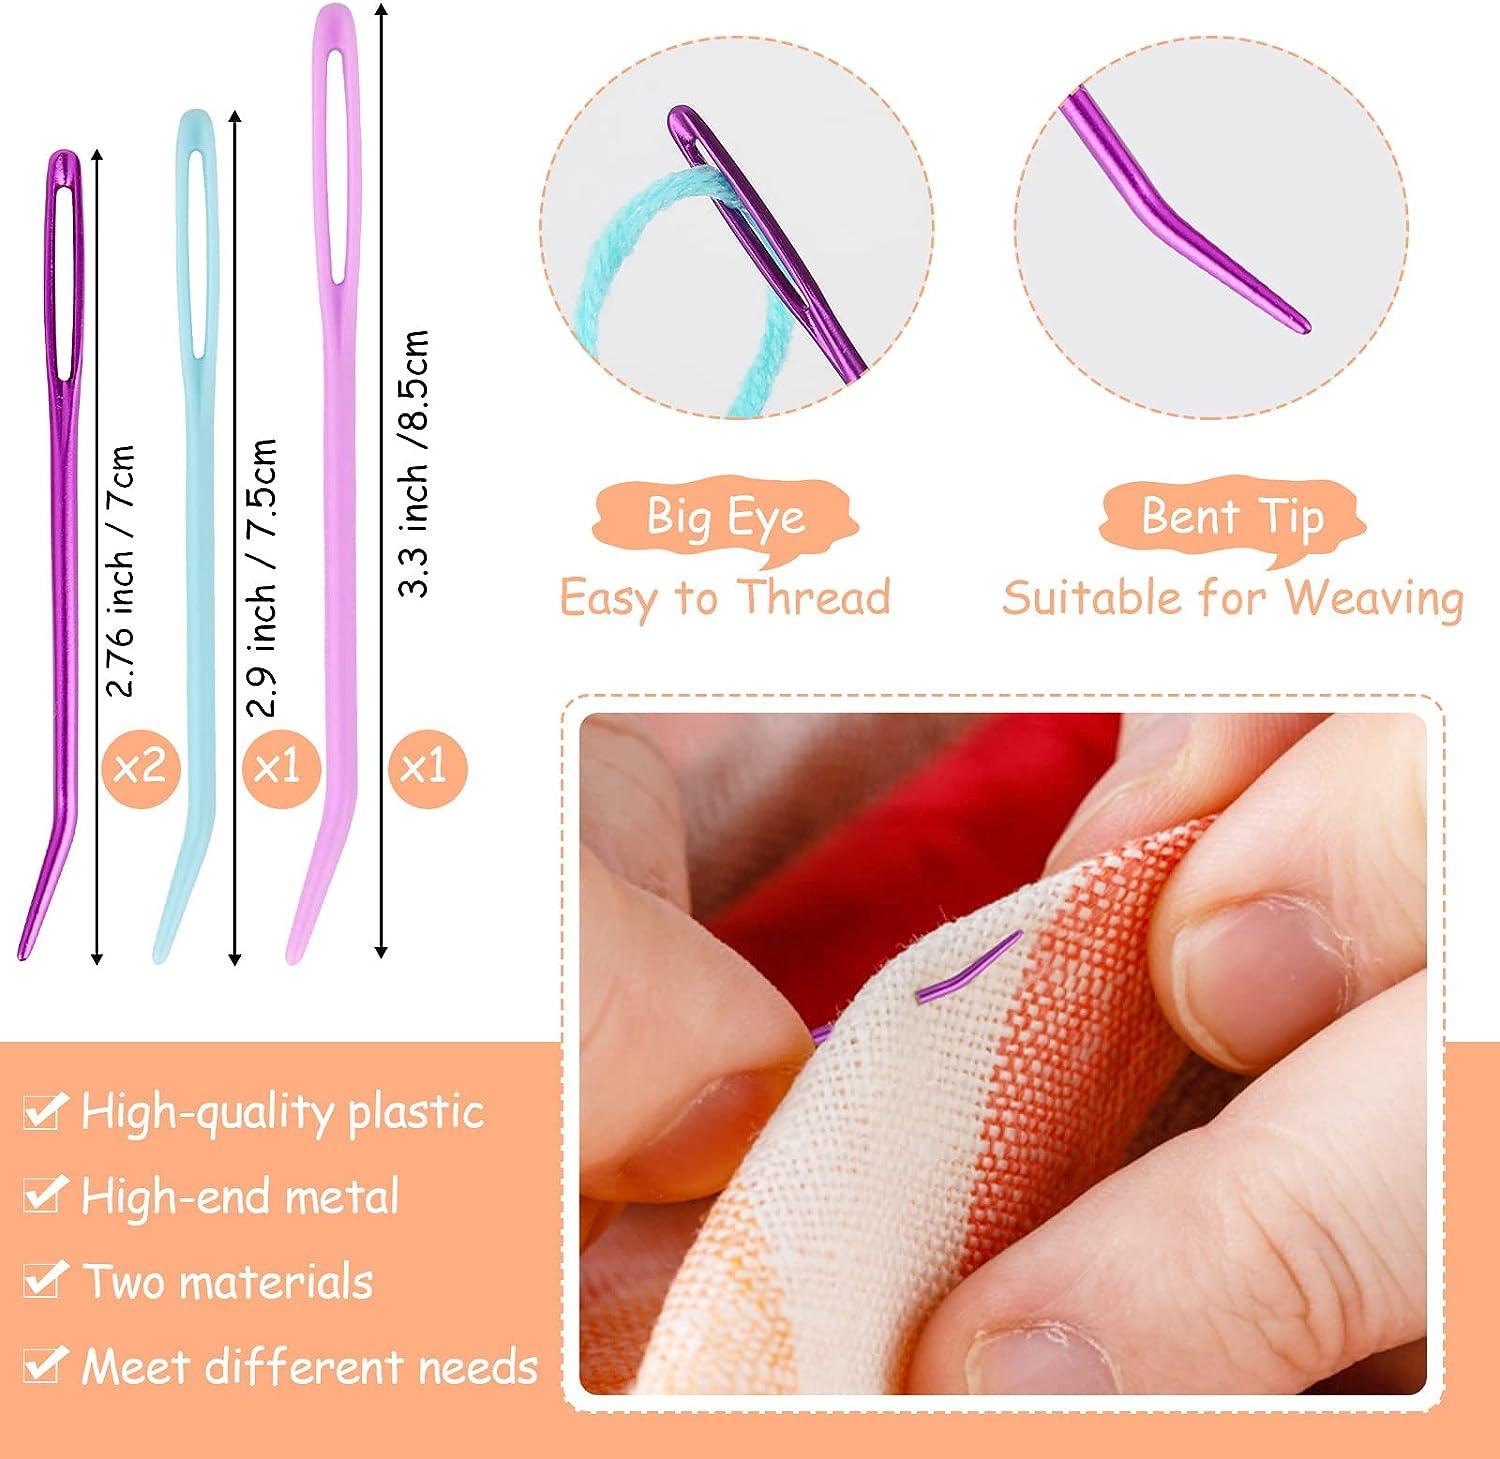 Yarn Needles Tapestry Needle for Crochet - 10 Pcs Large Eye Darning Needle for Sewing,Blunt and Curved Tapestry Needle for Knitting,Weaving Stitch